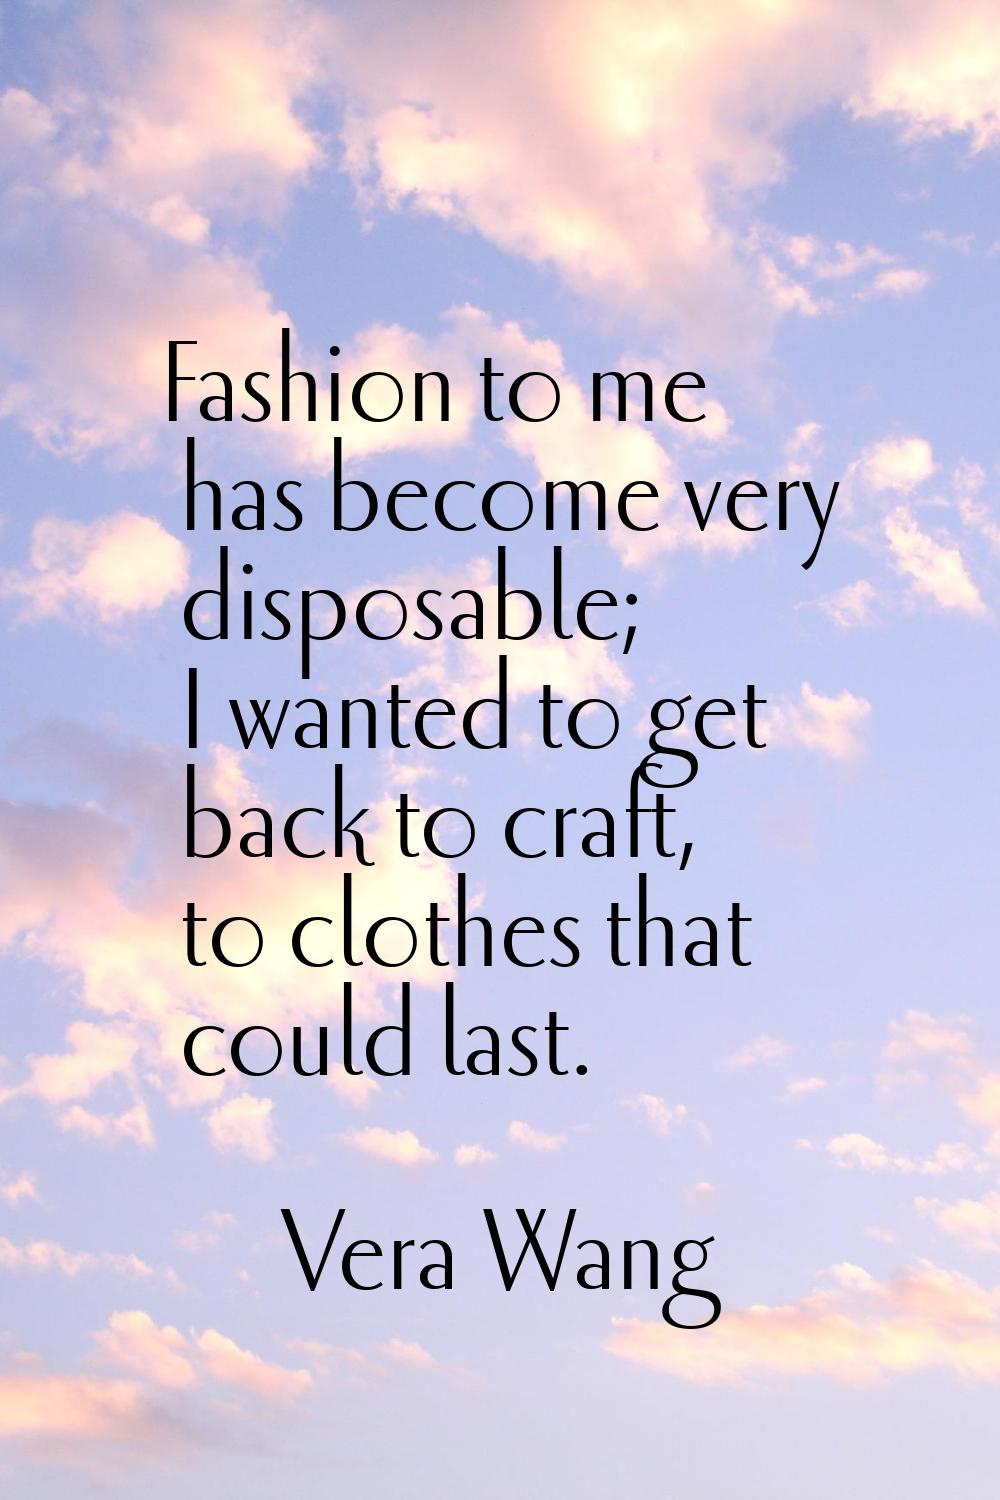 Fashion to me has become very disposable; I wanted to get back to craft, to clothes that could last